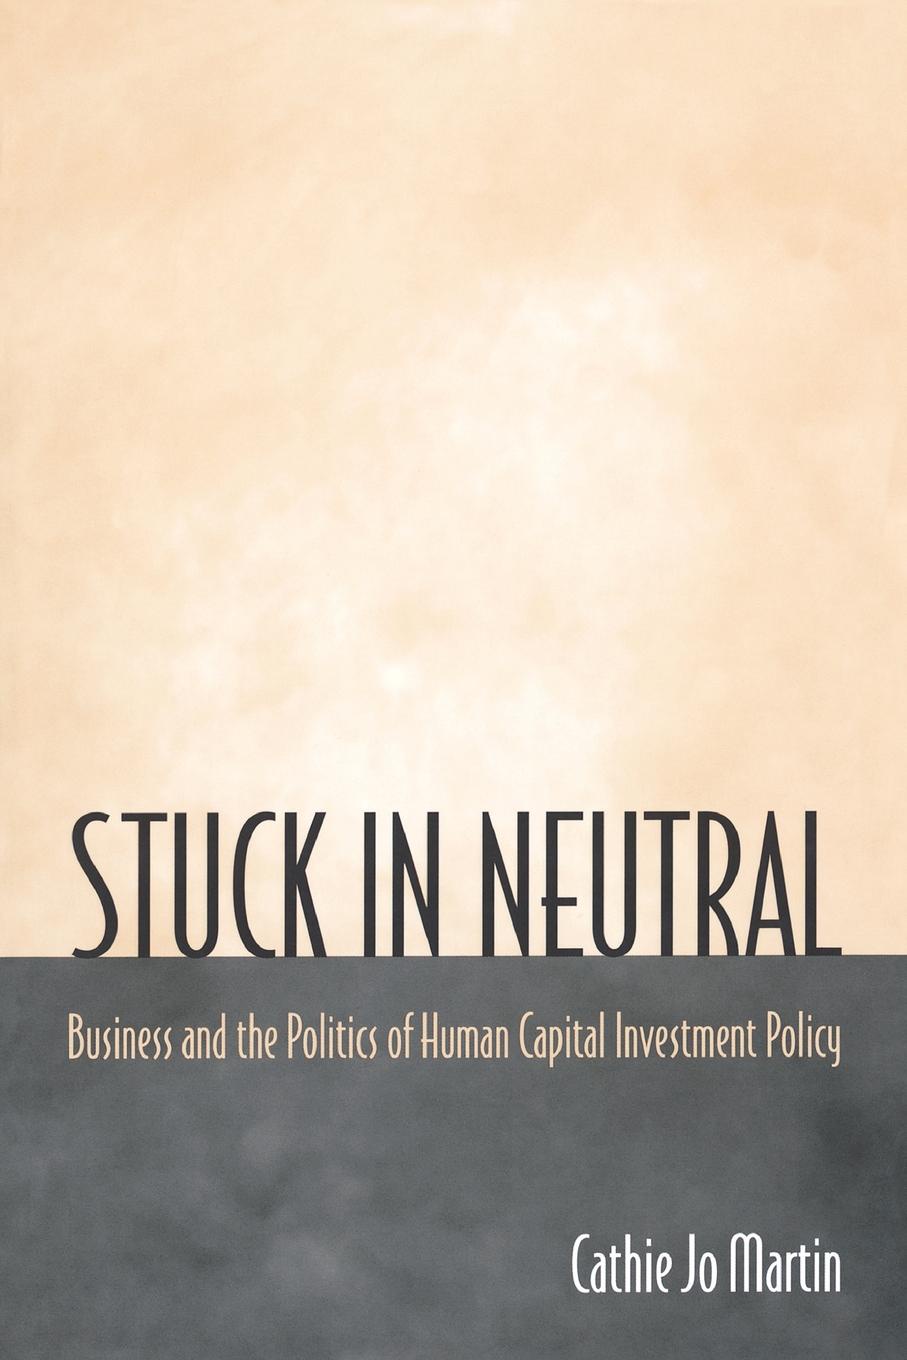 Stuck in Neutral. Business and the Politics of Human Capital Investment Policy